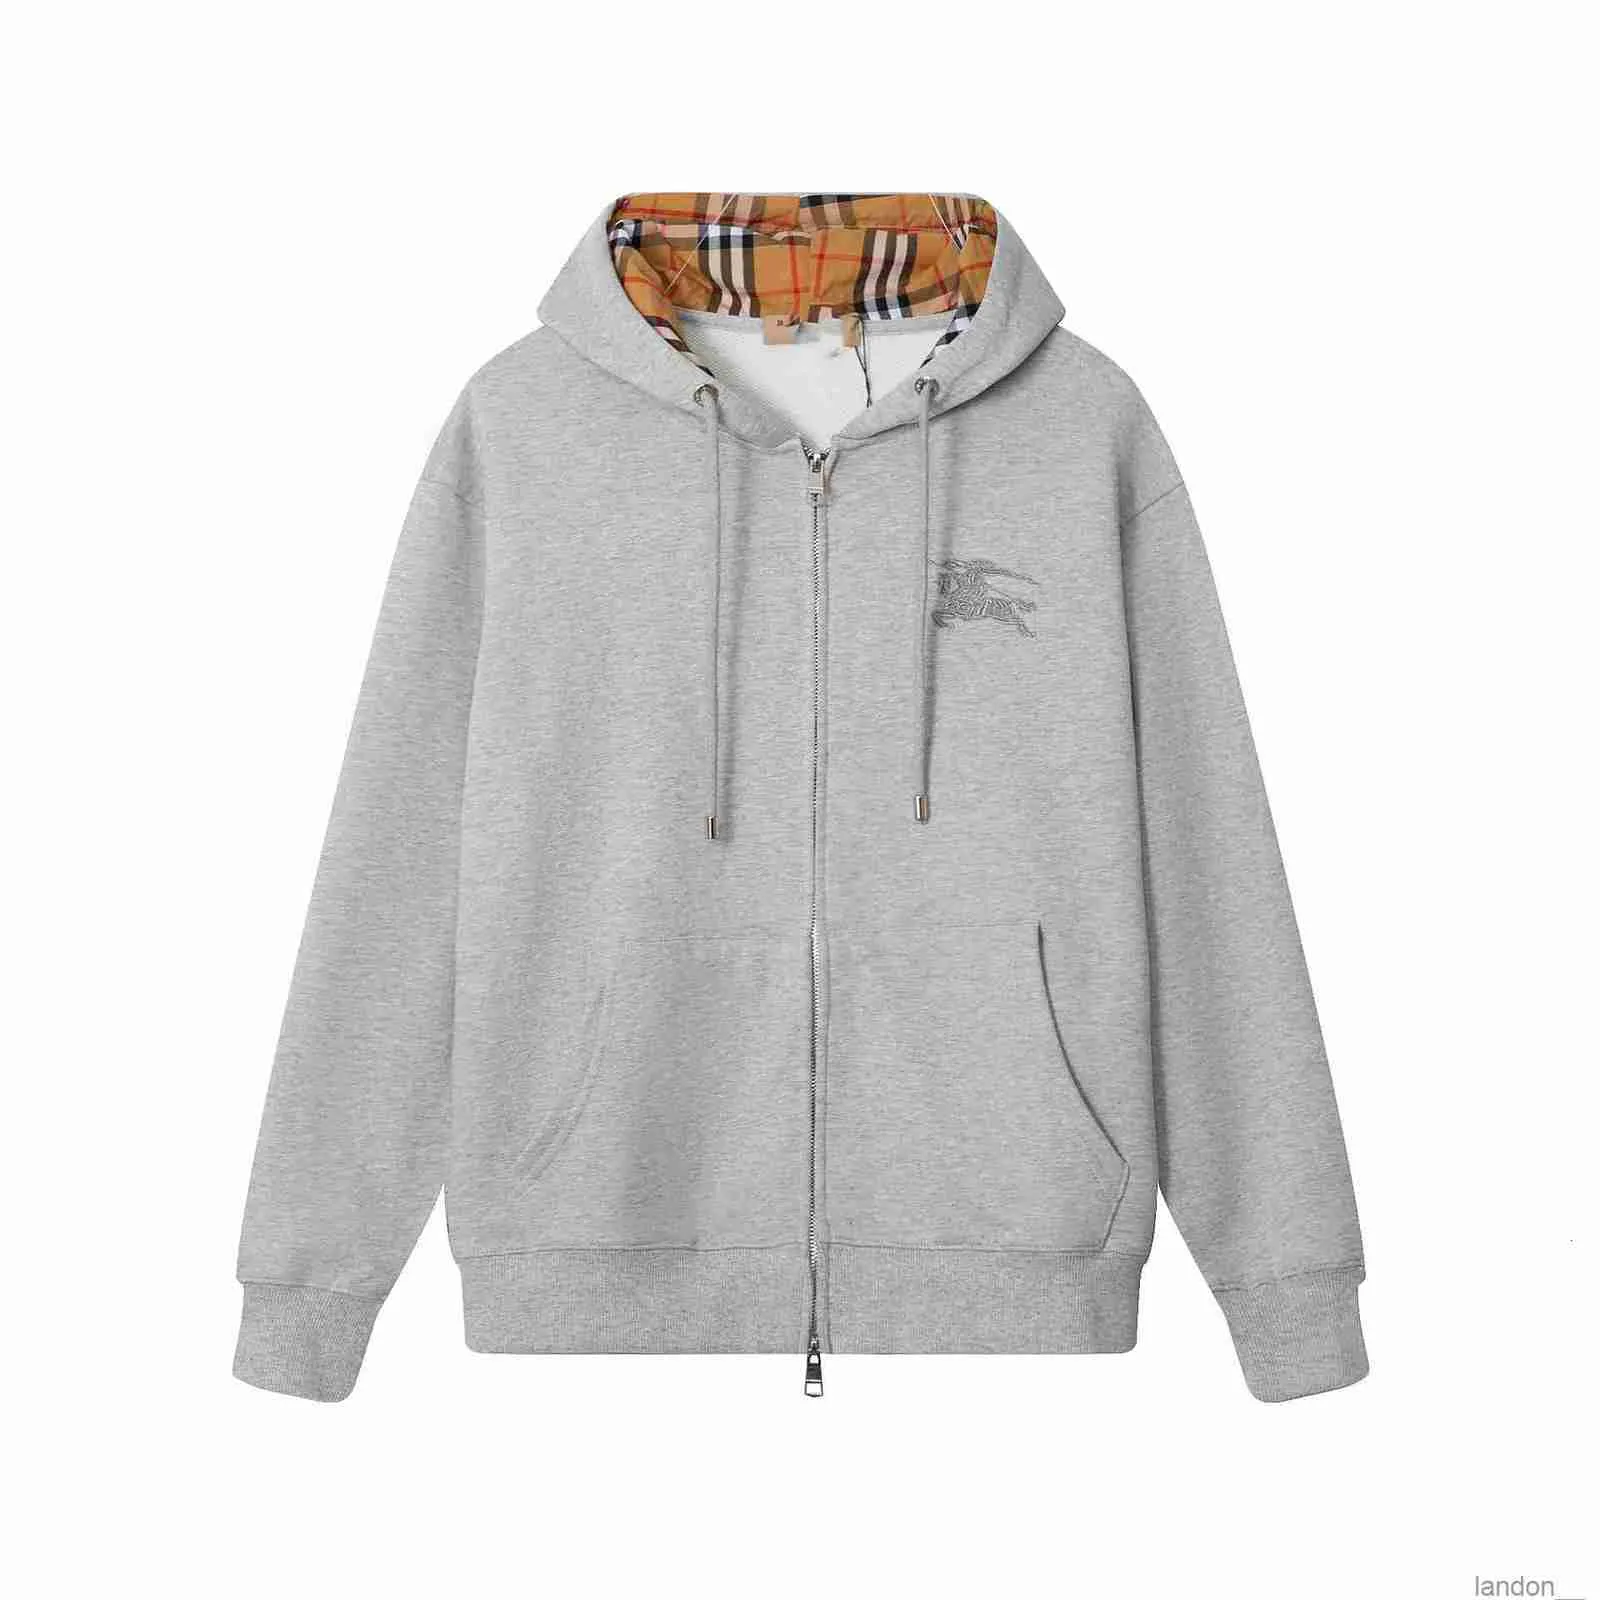 Ba Jia Warrior Horse Embroidery Classic 460g High Edition Terry Hooded Coat Autumn/Winter Zipper Plaid Long